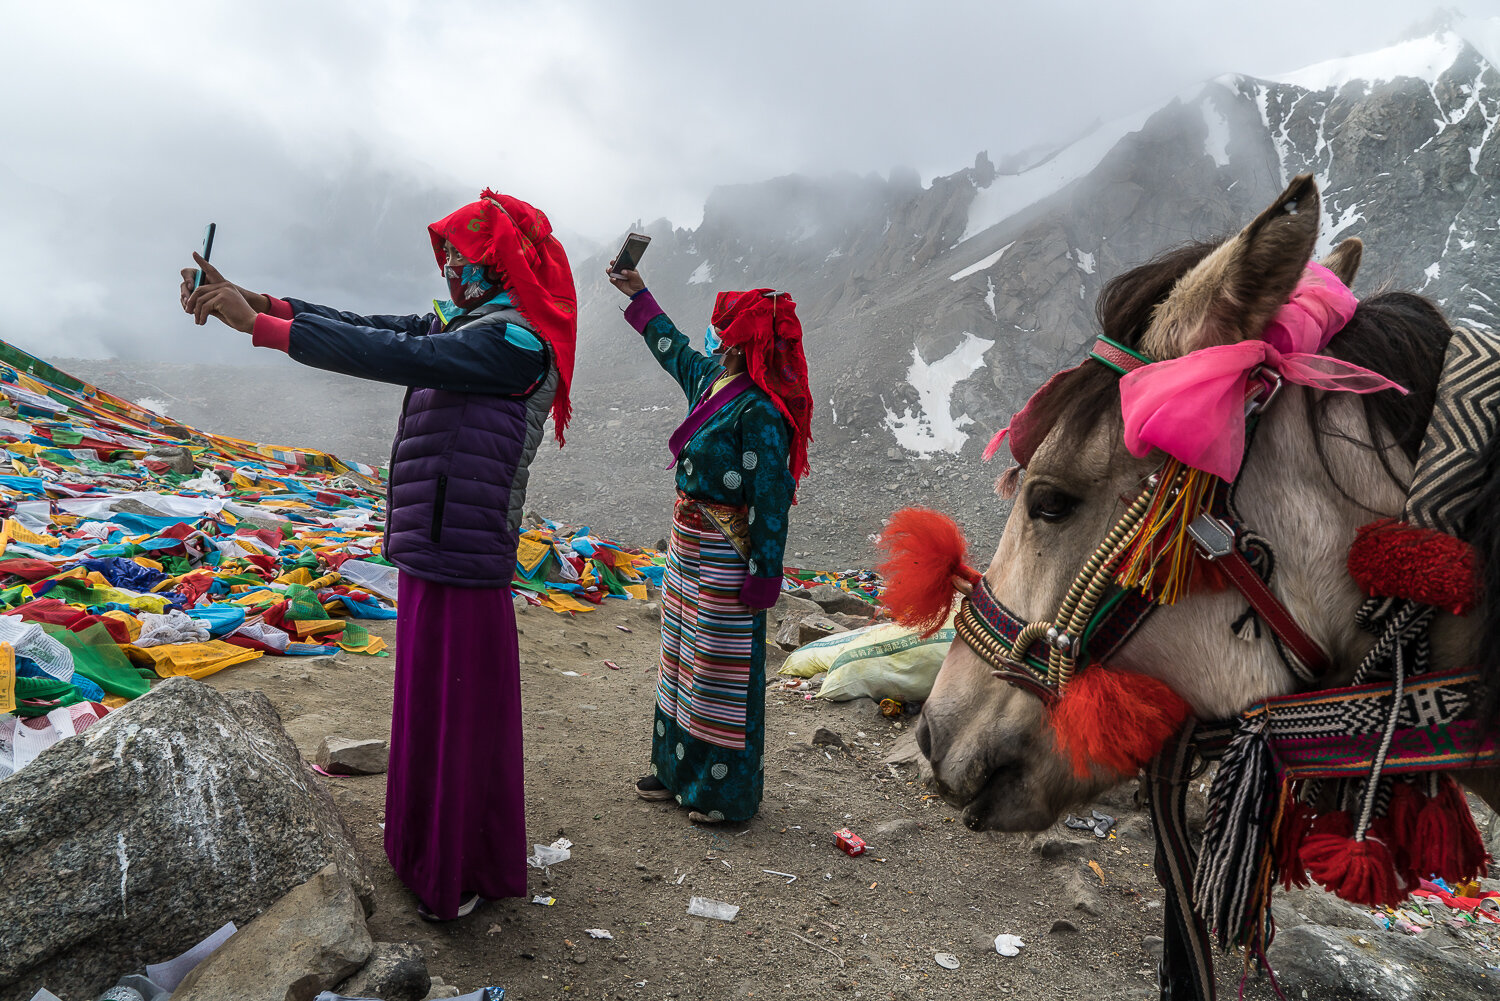  Buddhist pilgrims at the Drolma La, the highest point of the kora around Mount Kailash (5630 meters, or nearly 18,500 feet) take selfies on Thursday, September 12, 2019 in Burang County, Ngari Prefecture, Tibet, China. The mountain is considered sac